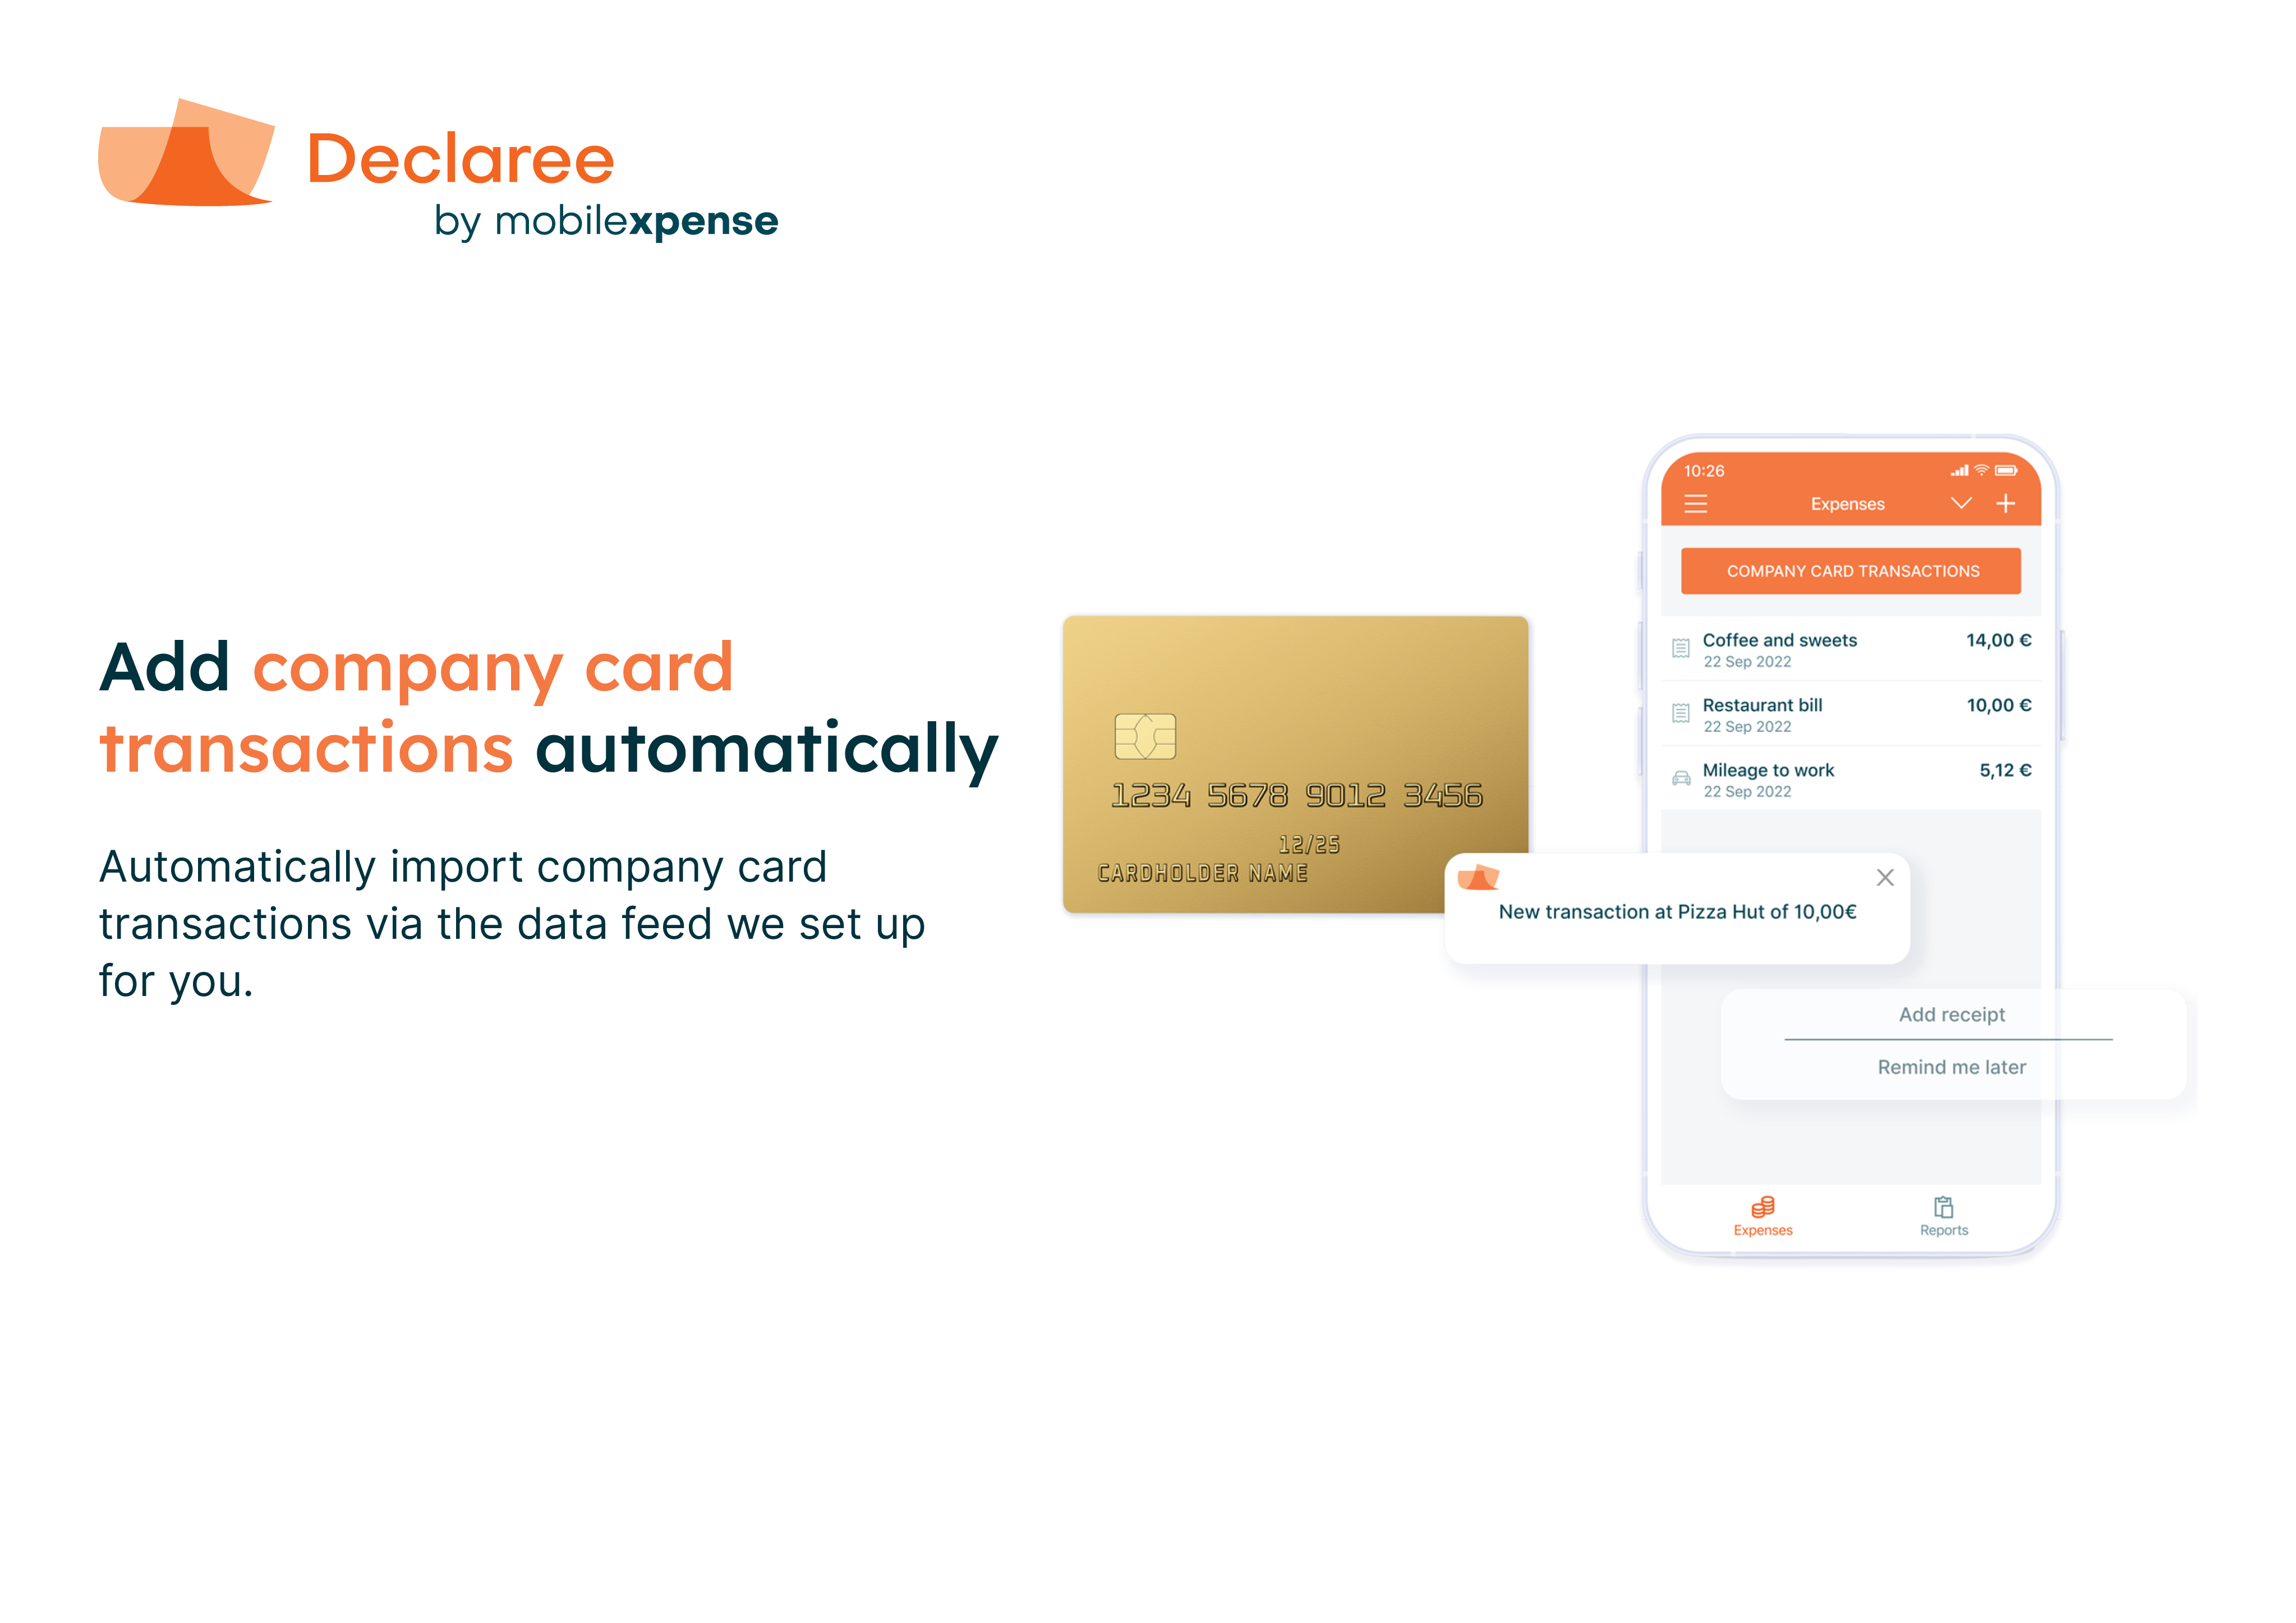 Automatically import company card transactions via the data feed we set up for you. Each card transaction triggers a push notification to add the relevant receipt.